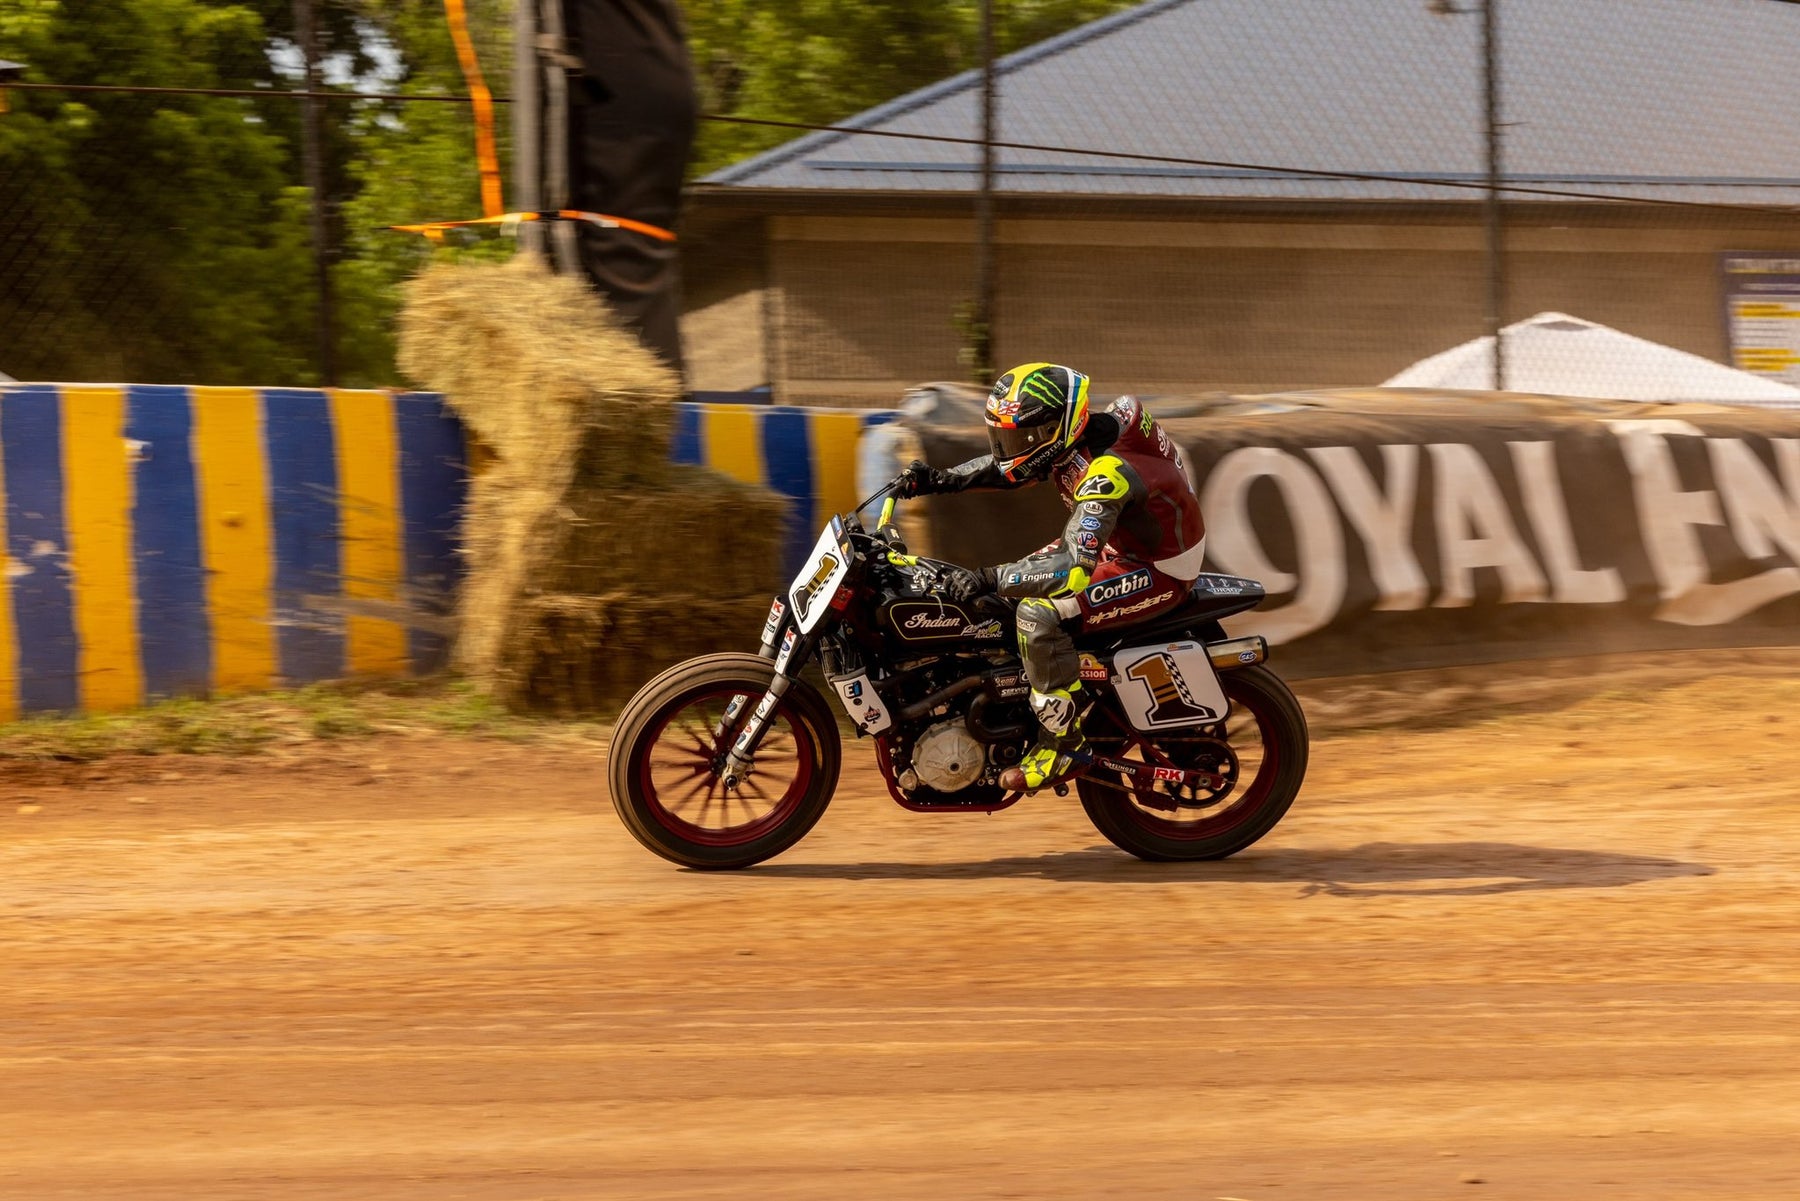 JARED MEES FURTHER CEMENTS HIS PLACE IN AMERICAN FLAT TRACK HISTORY WITH RECORD EQUALING HALF-MILE SUPERTWINS VICTORY IN VIRGINIA